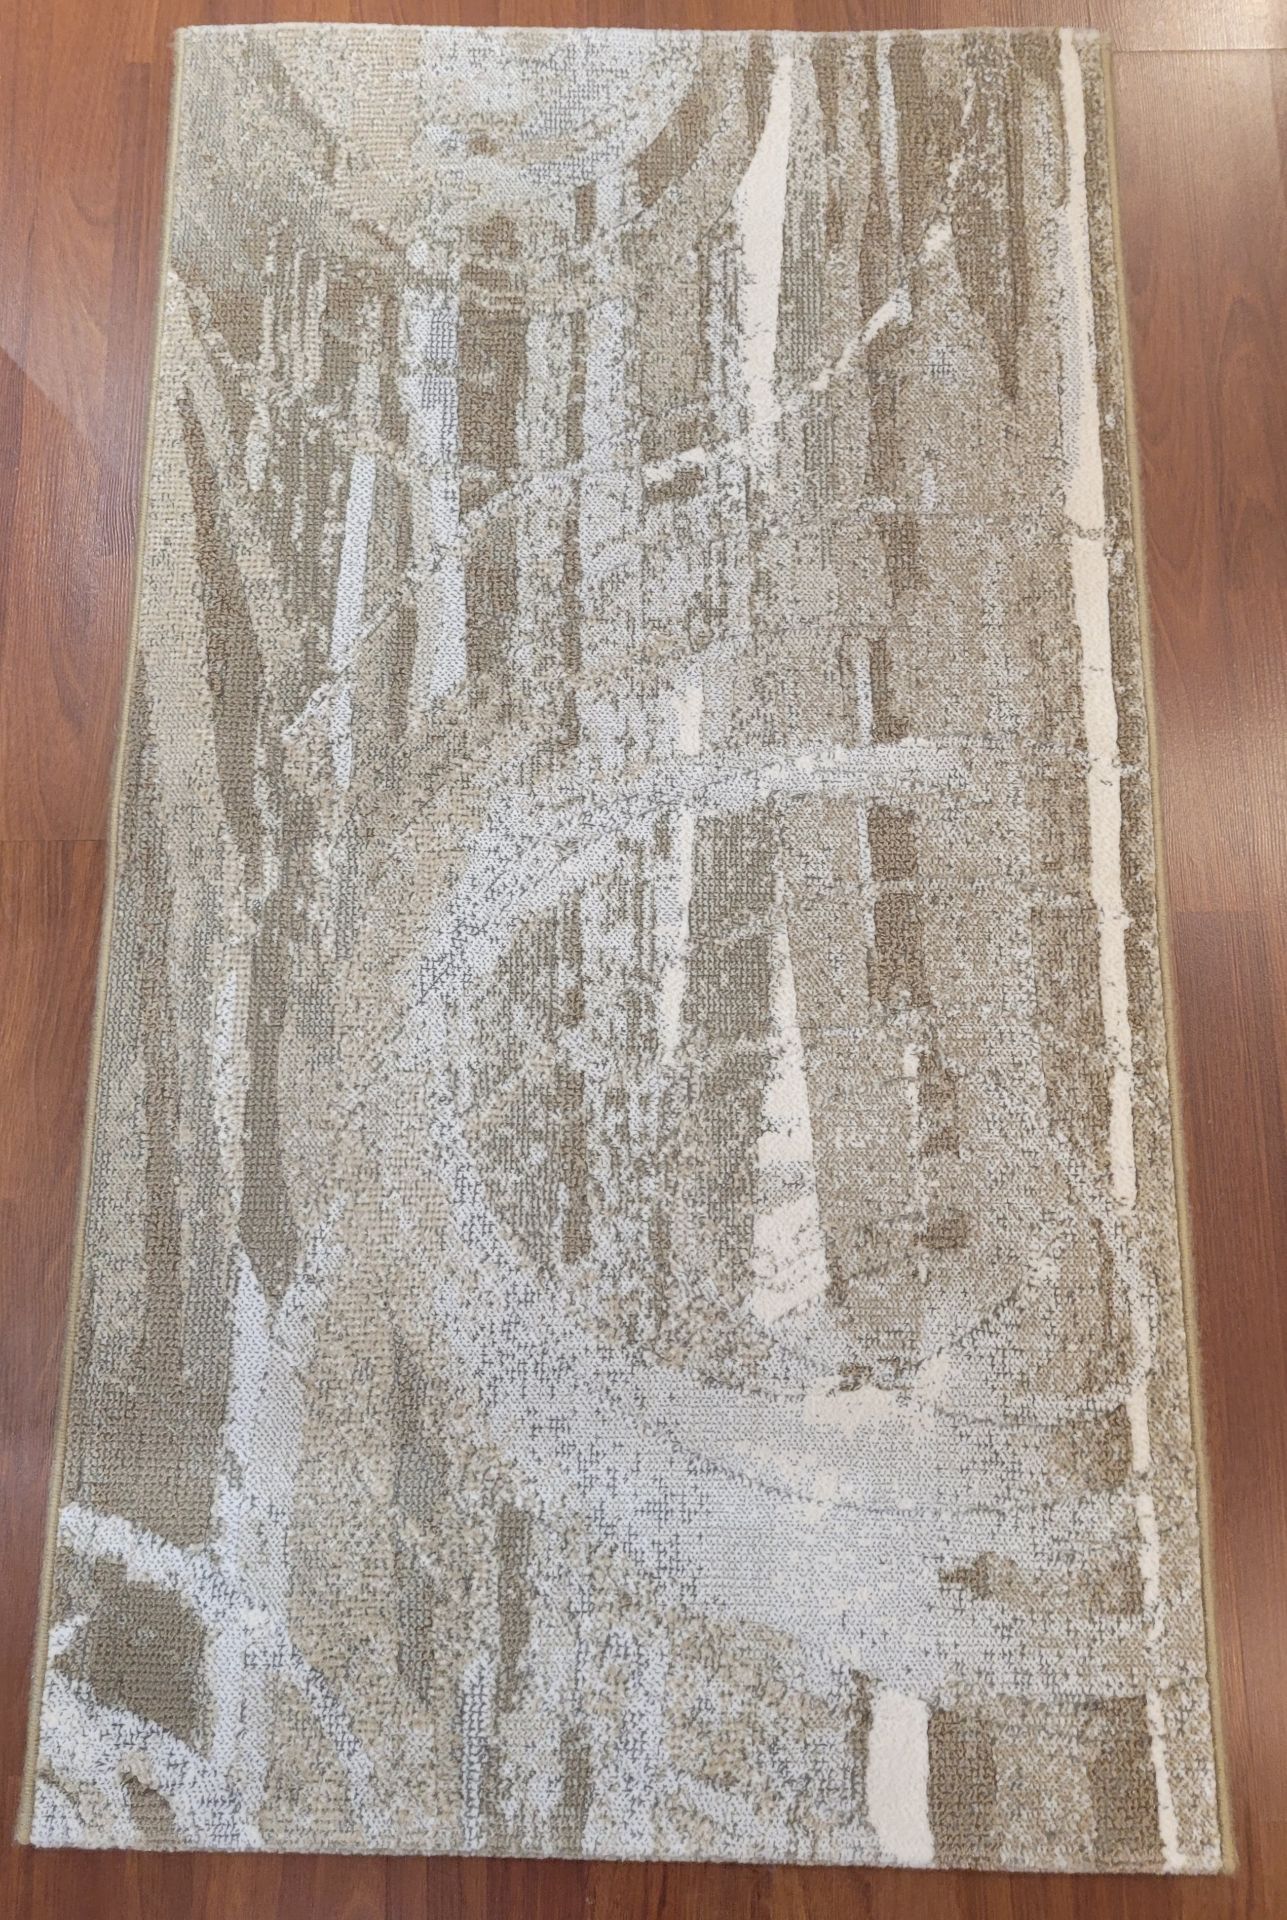 2'5" X 4'5" NAXOS MADE IN BELGIUM - MSRP $267.00 EA. (LOCATED IN WALL-TO-WALL) INVENTORY CODE: 12-37